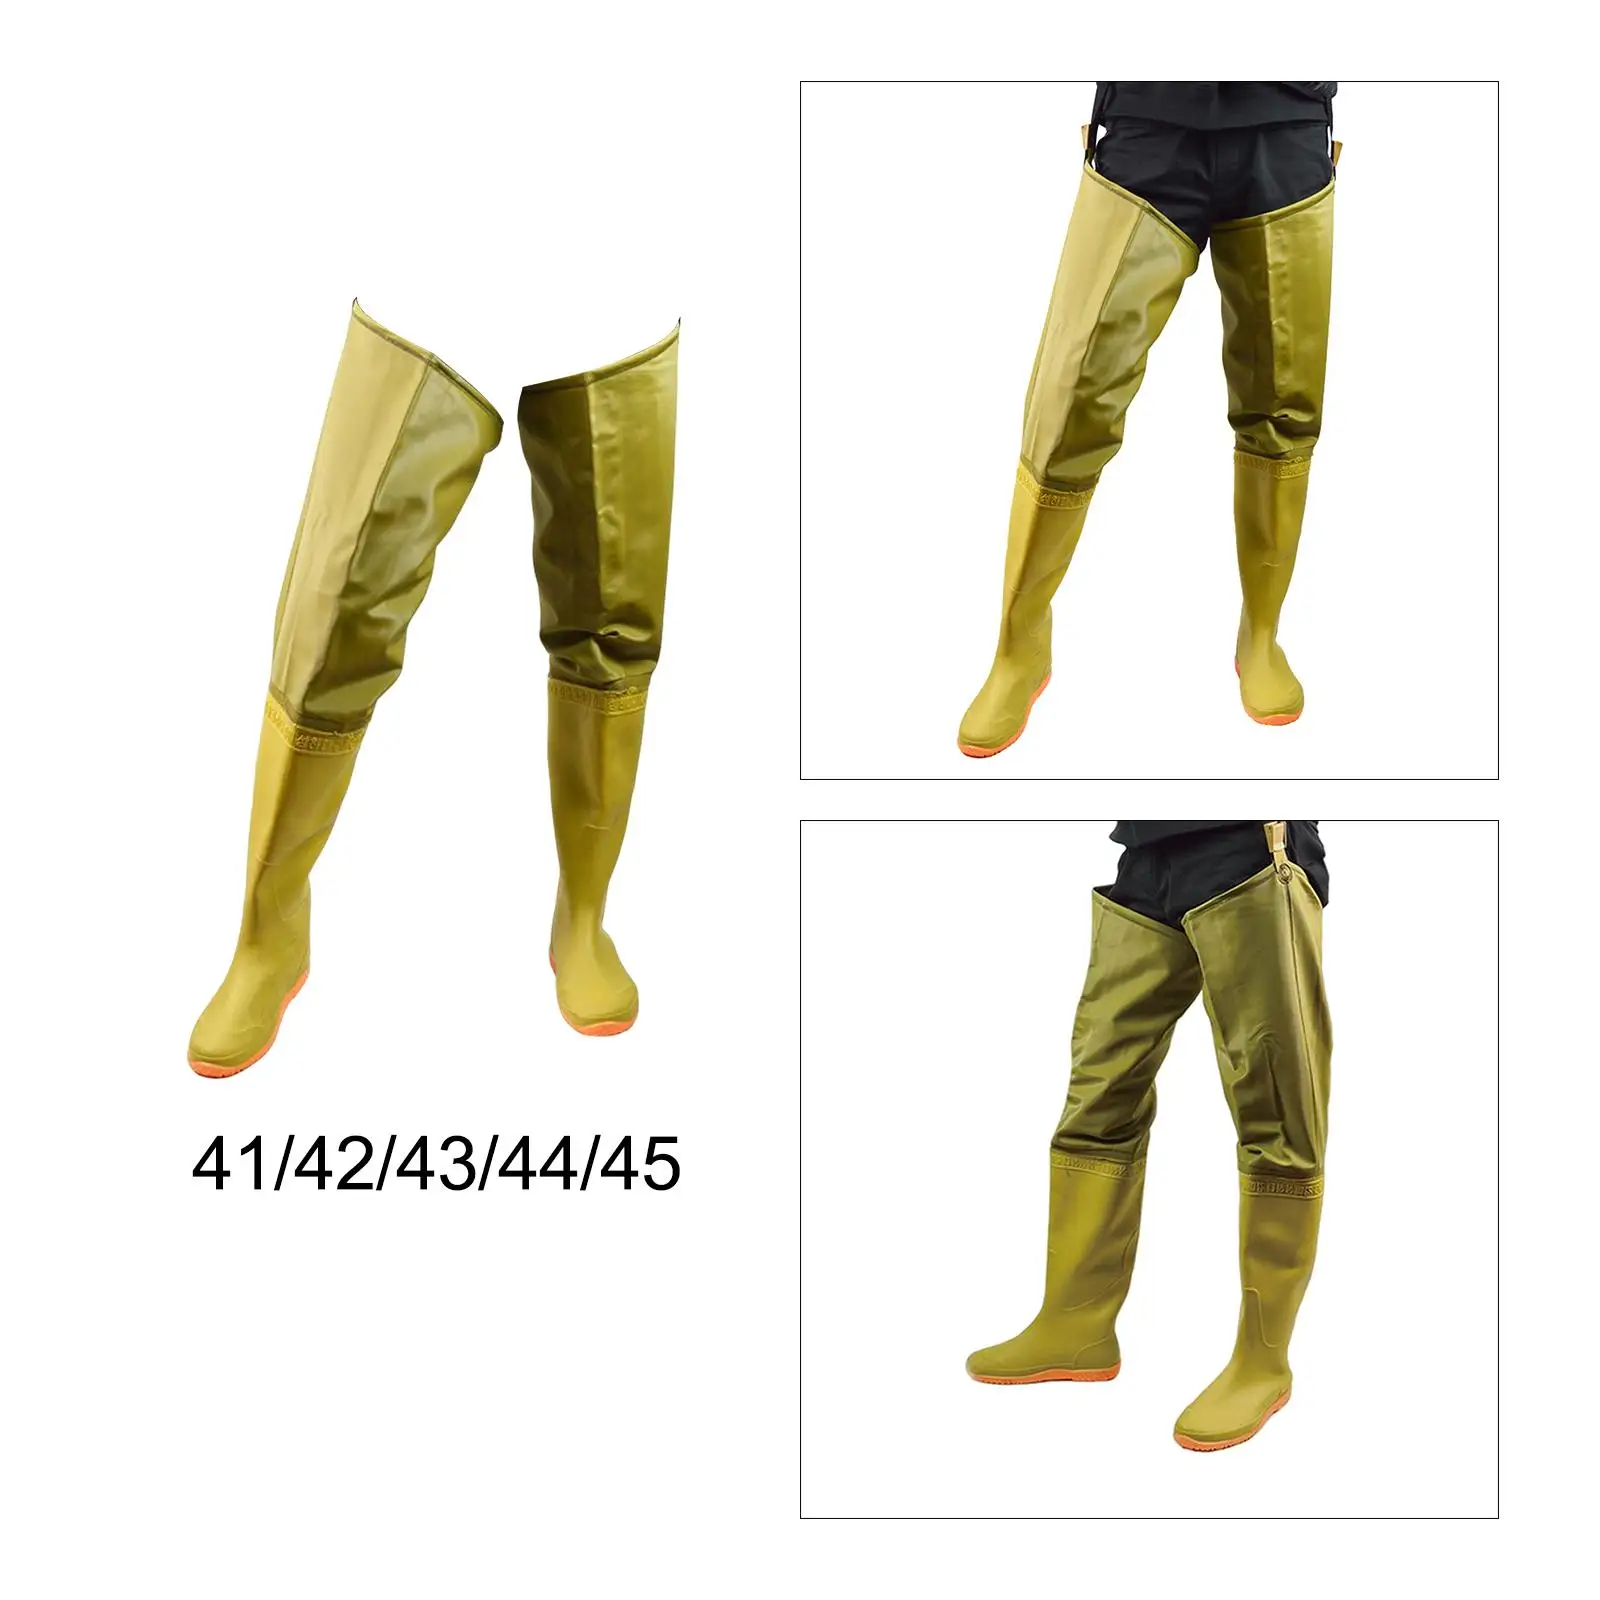 Fishing Hip Waders Watertight Wading Hip Boots Thigh Waders Wellies Nylon Fishing Waders for Agriculture Fishing Muck Work